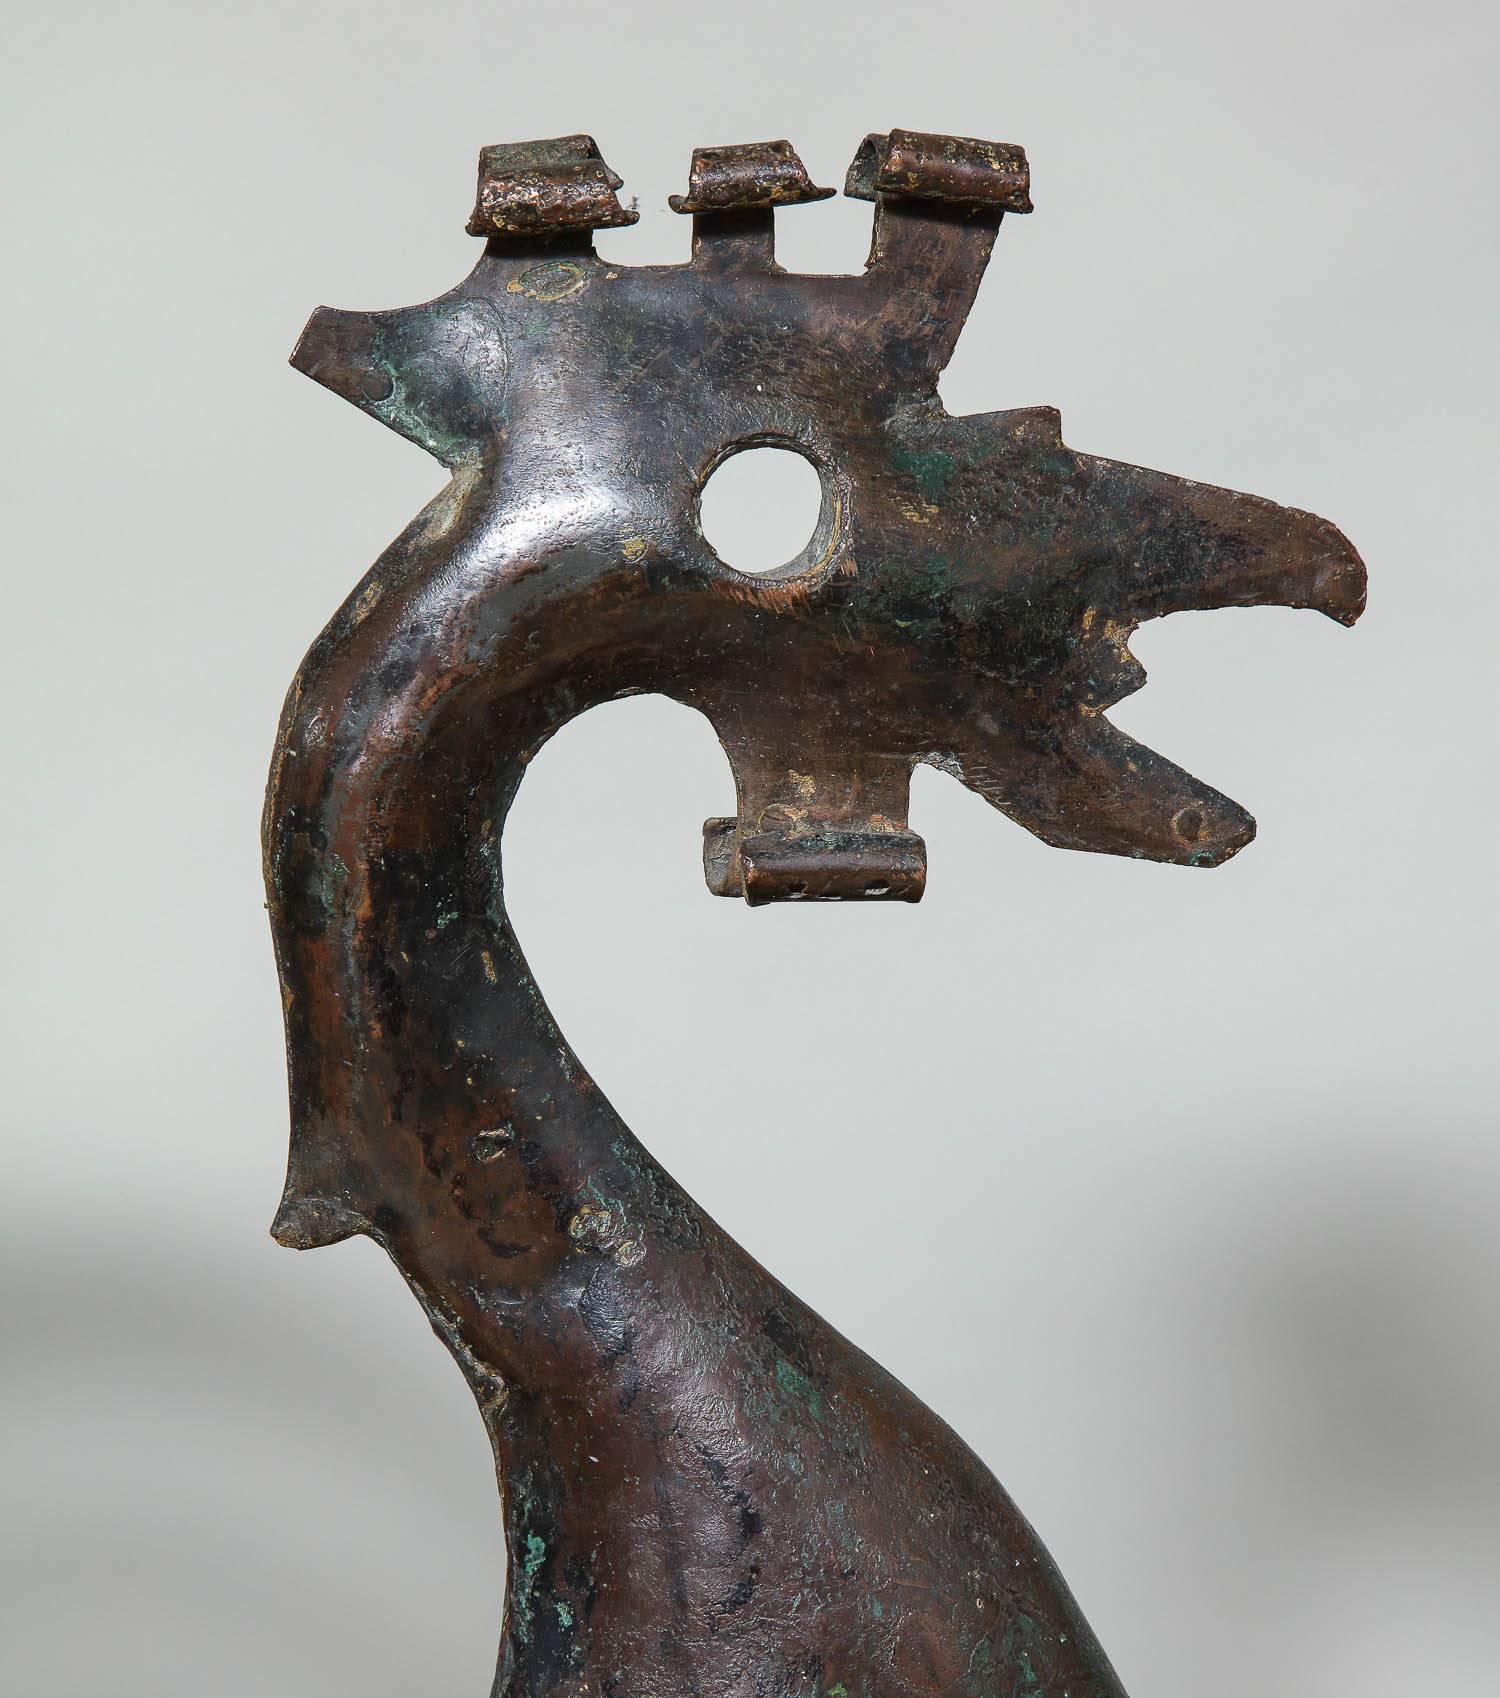 Very fine 18th century English hand-hammered copper full bodied rooster weathervane, the comb and waddle formed by curled copper, the eye and tail with pierced decoration, the whole with good bronze like surface.

Sizes include the wood stand.
 